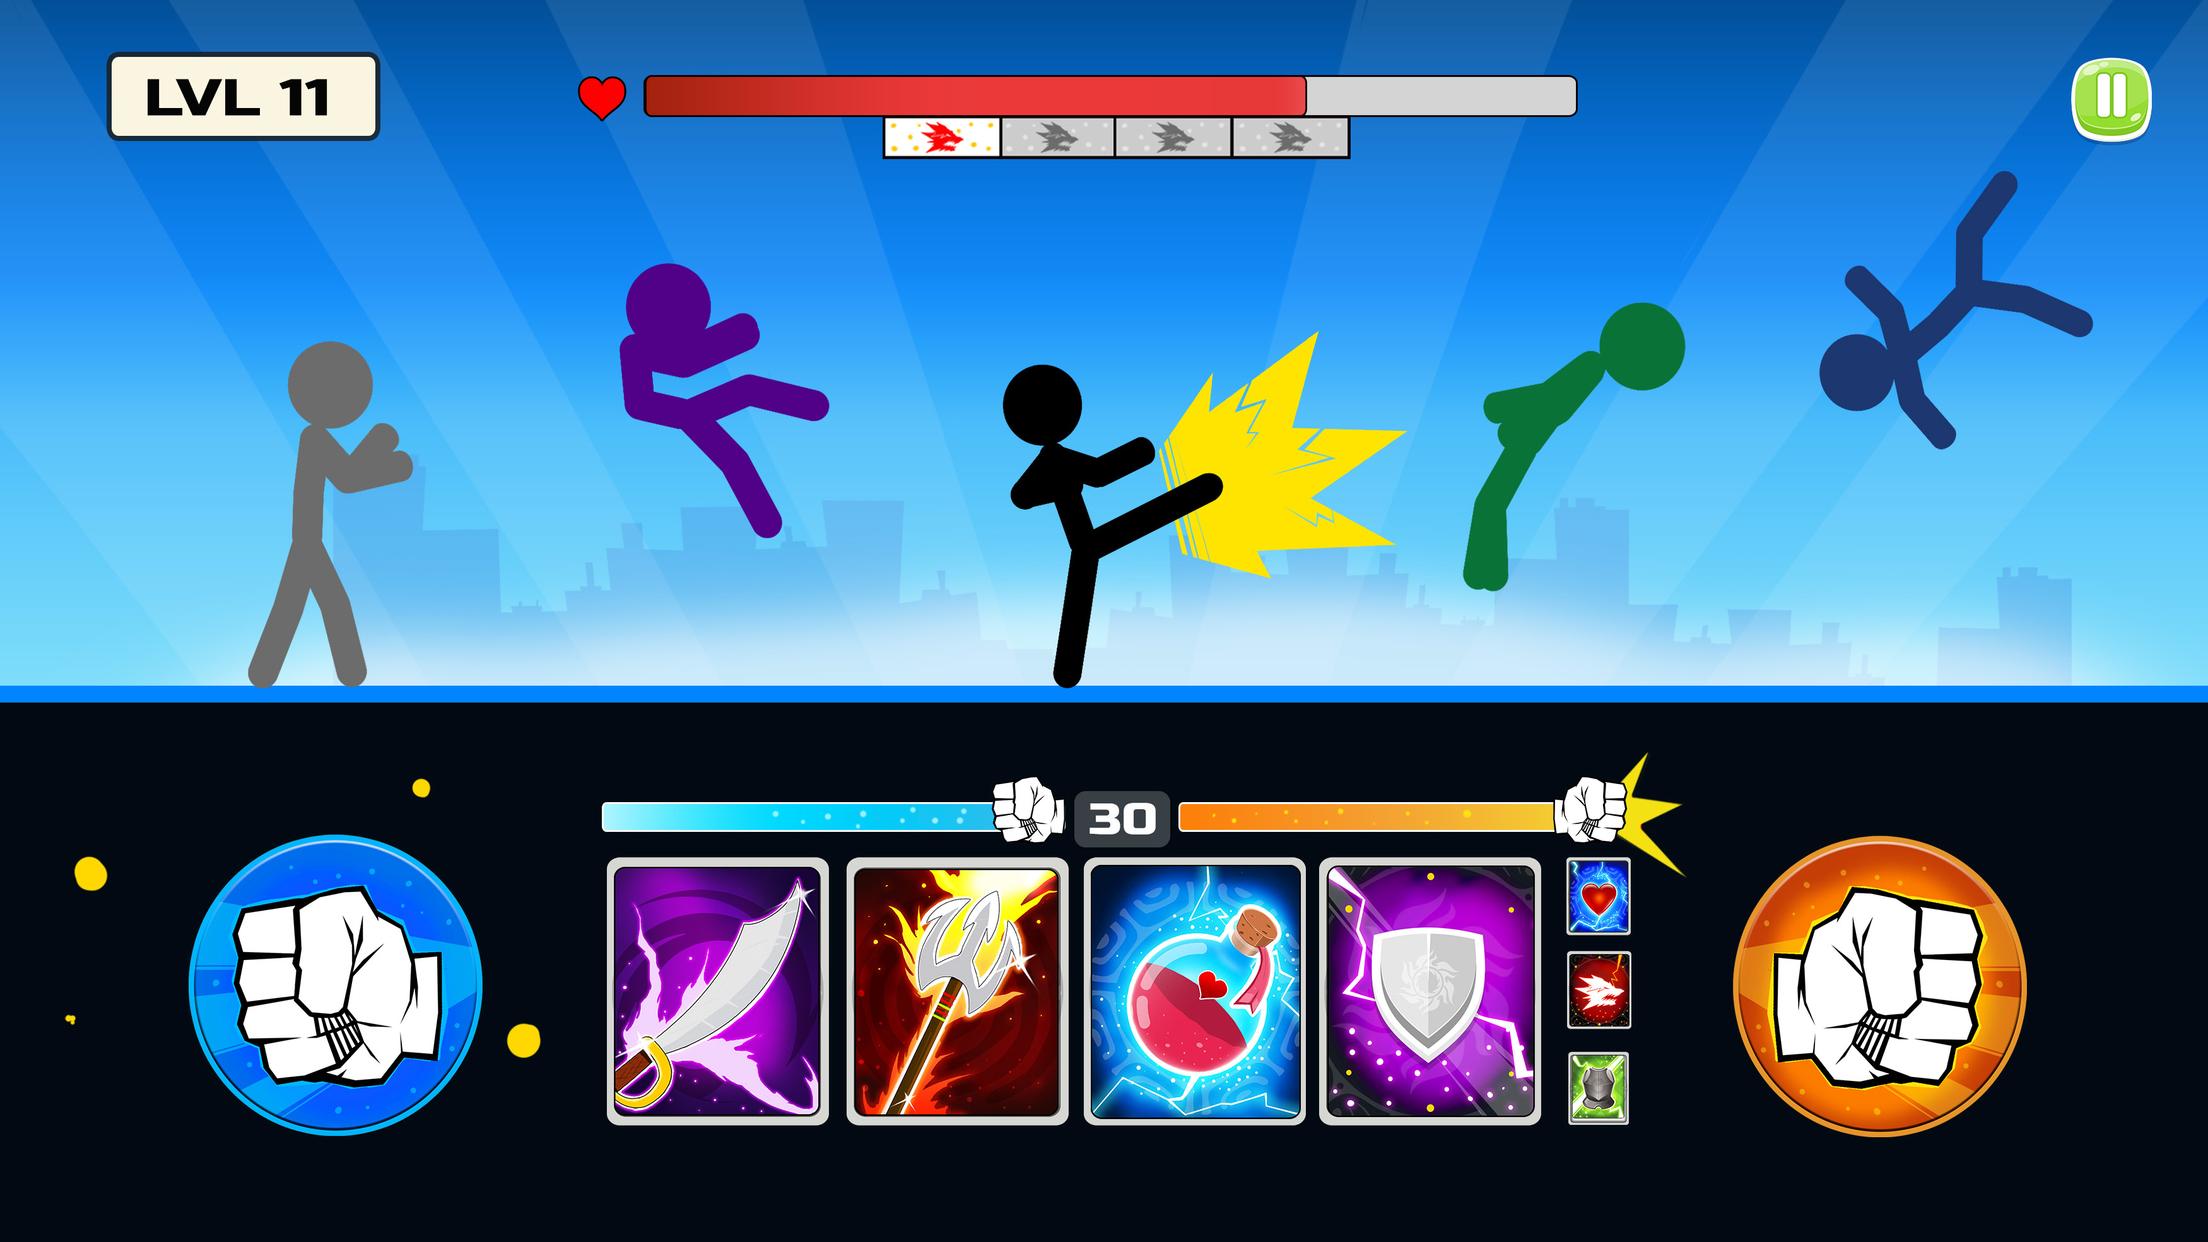 STICKMAN FIGHTER: EPIC BATTLE - Play for Free!